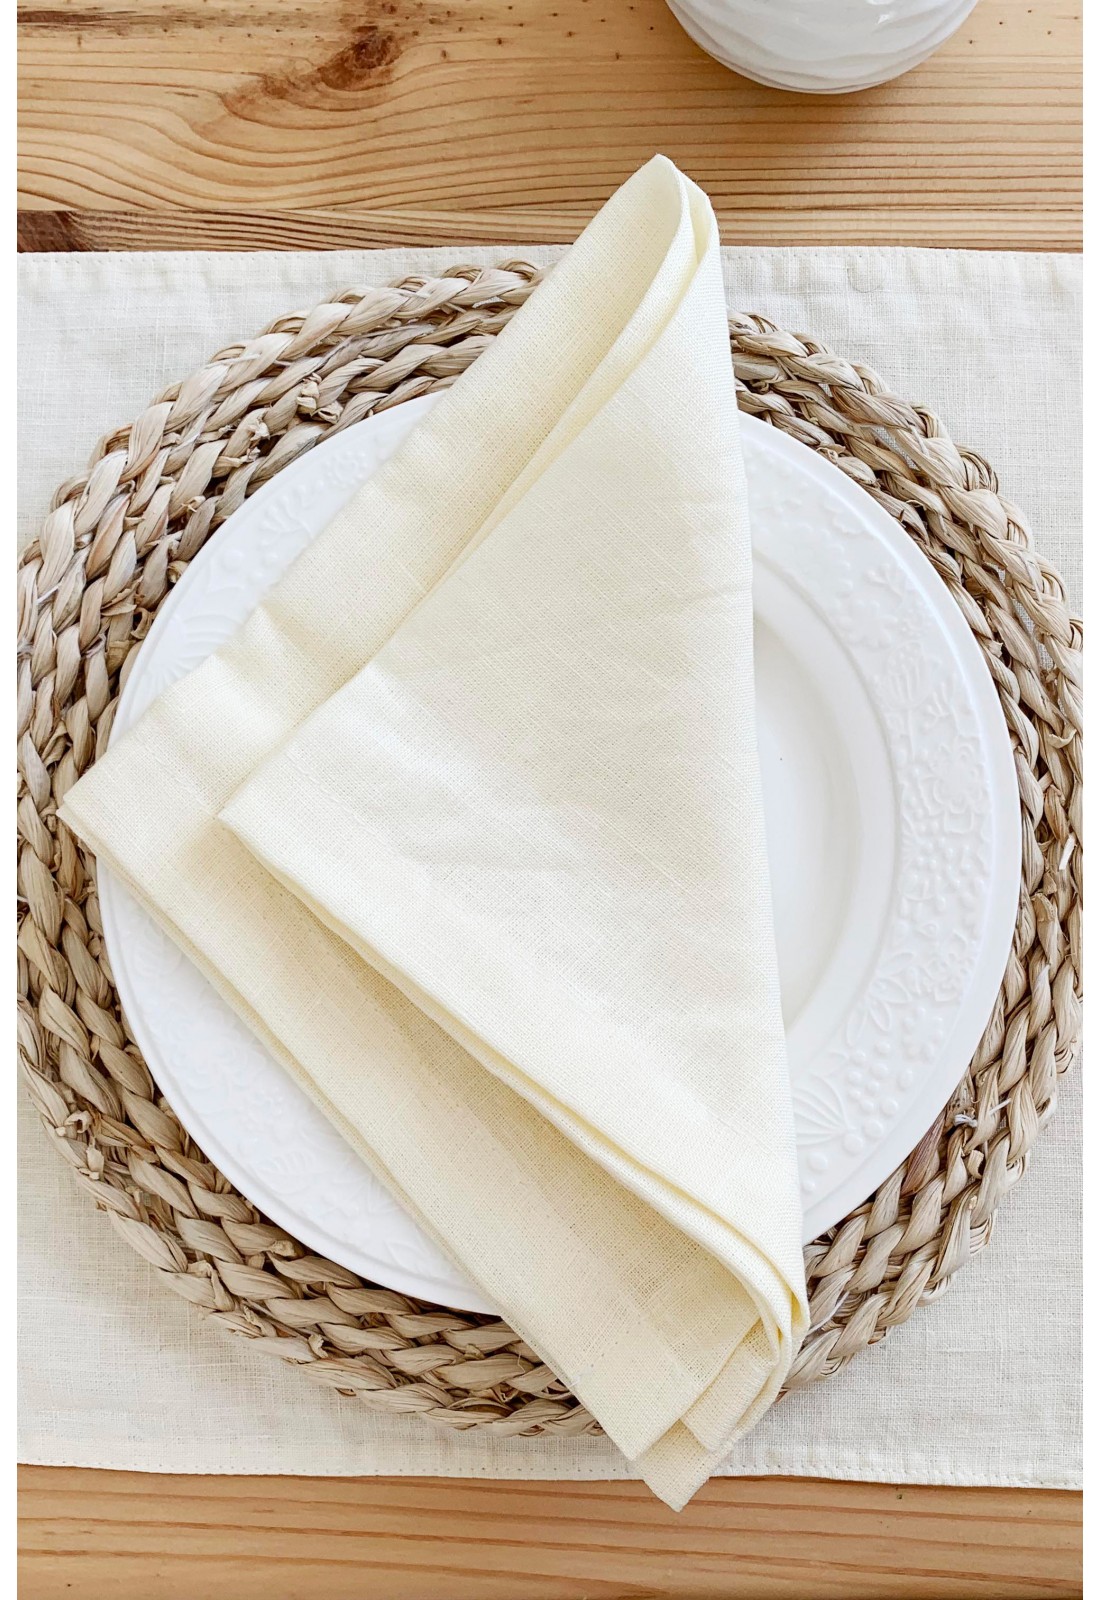 https://www.touchablelinen.com/image/cache/catalog/products/22/Linen-table-placemats-in-Off-white-1-1100x1600.jpg